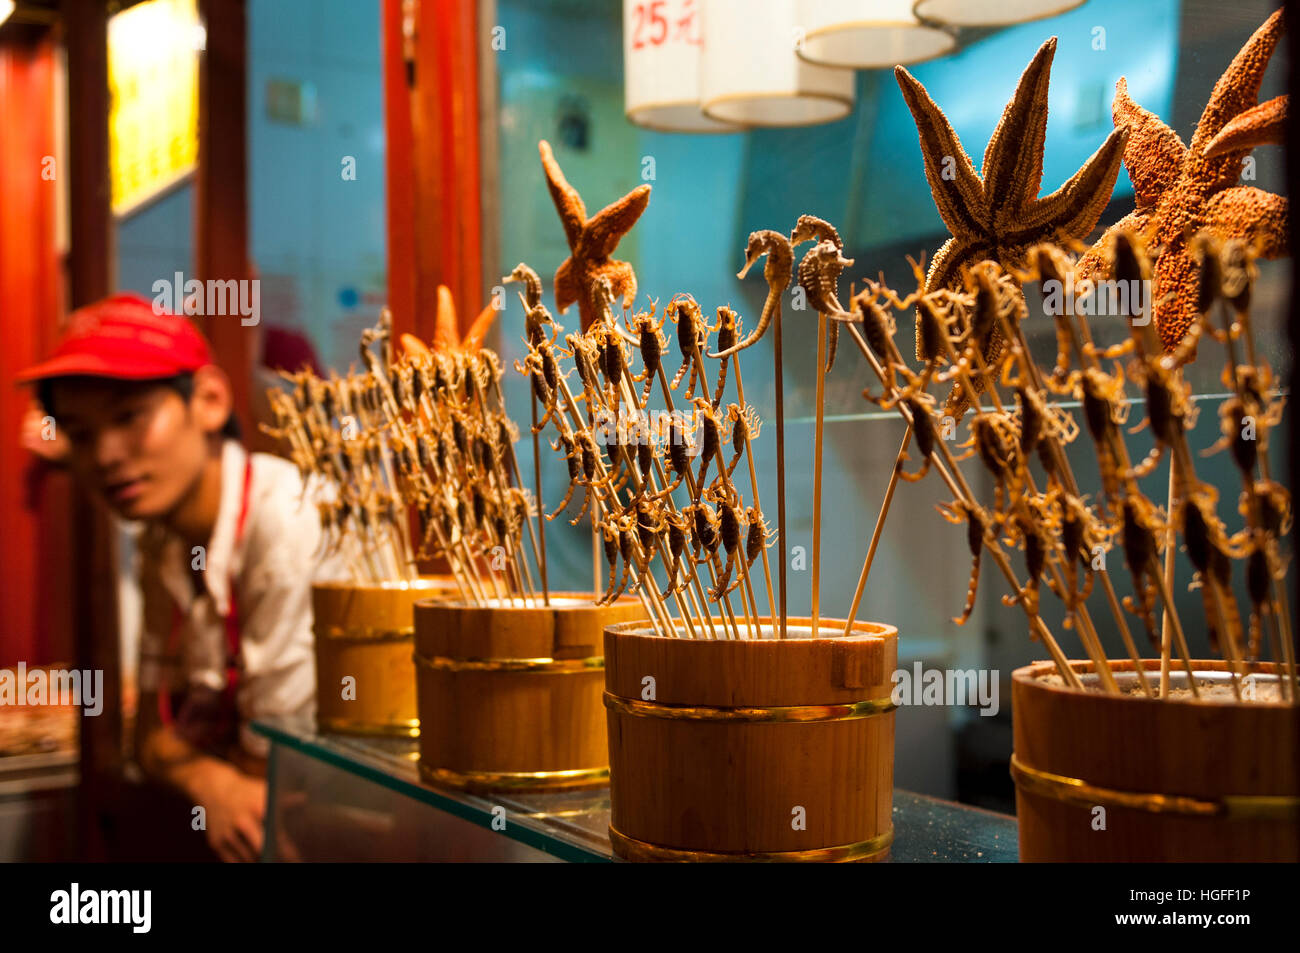 Fried scorpions, seahorses and starfish being sold as food in a food stall in Beijing, China Stock Photo